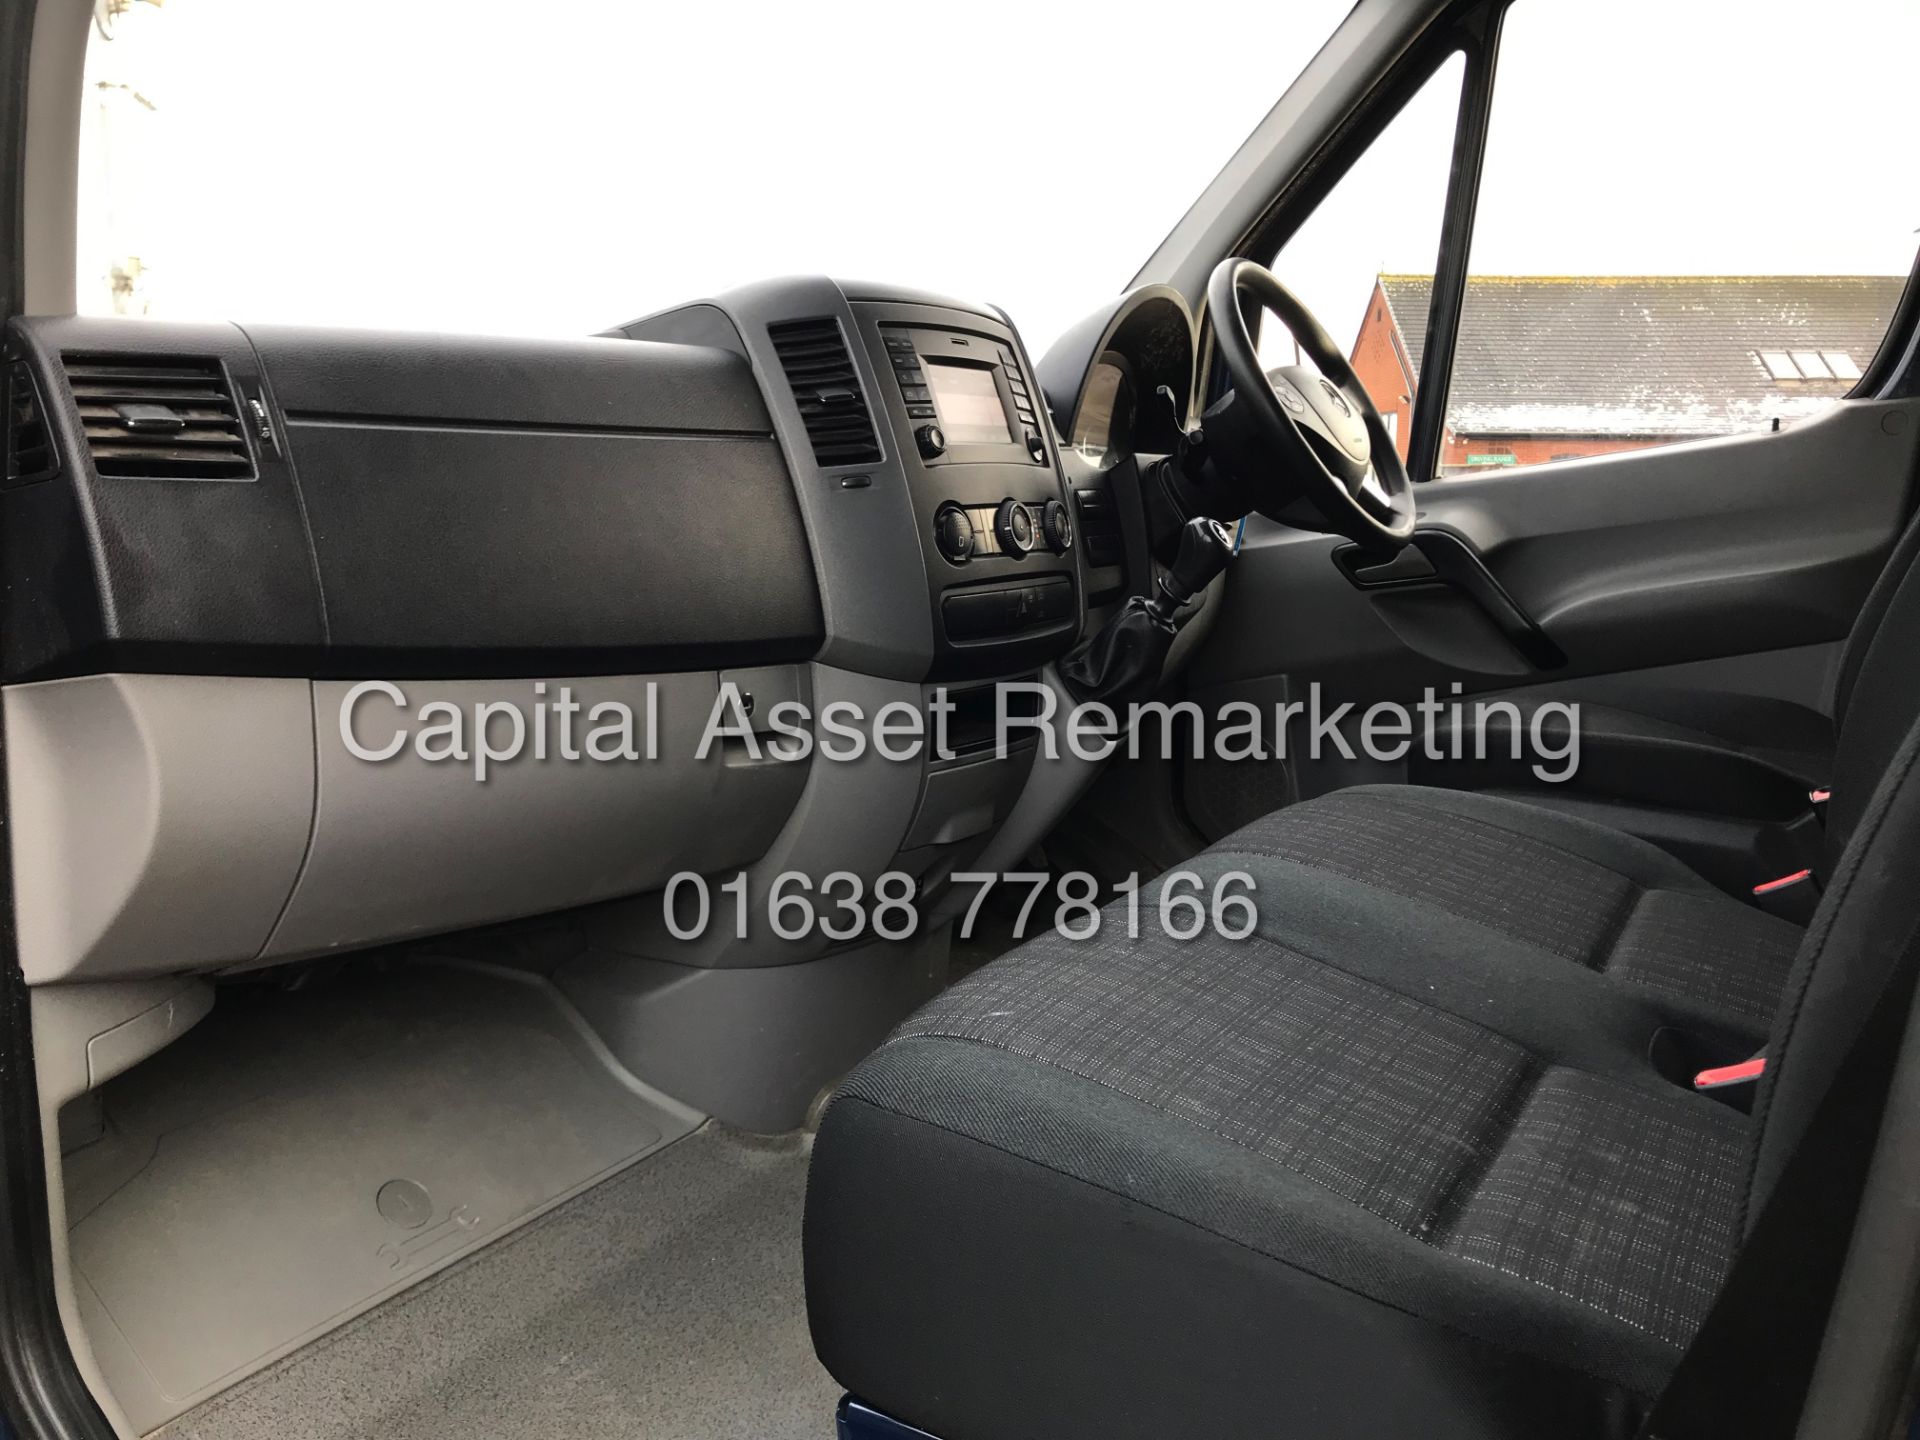 MERCEDES SPRINTER 313CDI "130BHP" 1 OWNER (2016 MODEL) AIR CON-SAT NAV-CRUISE *IDEAL FOR CONVERSION* - Image 11 of 12